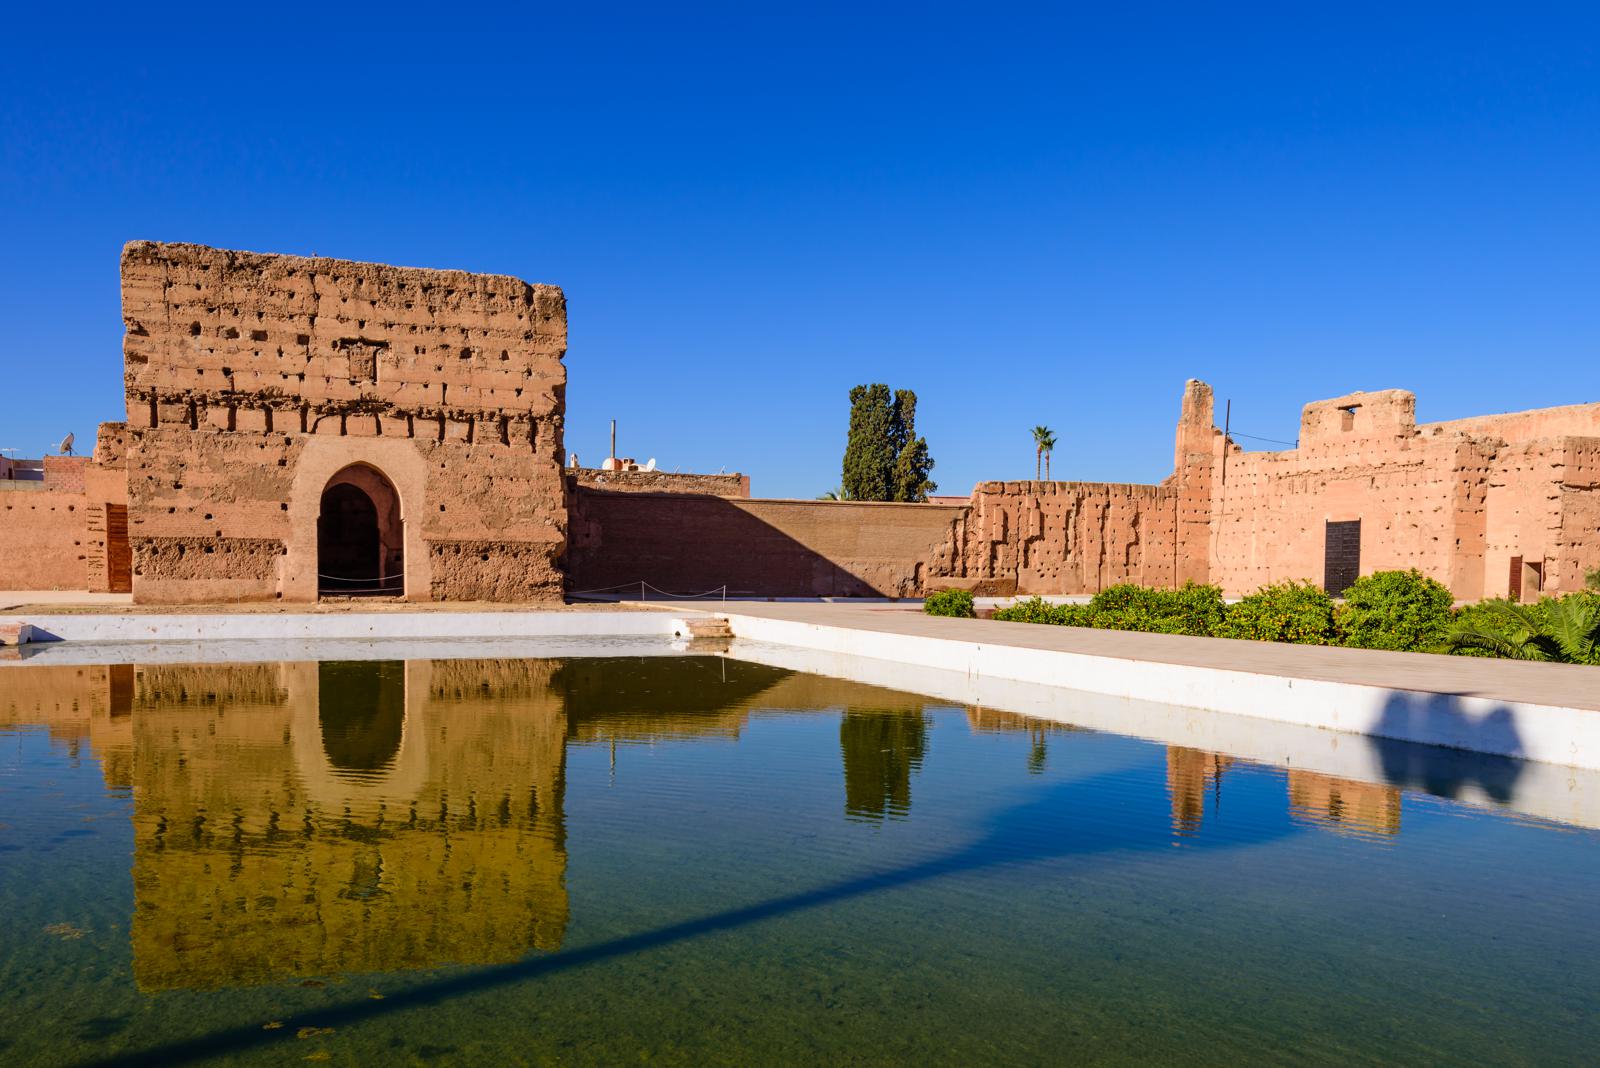 Are You One of the 10% Who Can Get at Least 18 on This 24-Question Geography Quiz? El Badi Palace, Marrakesh, Morocco